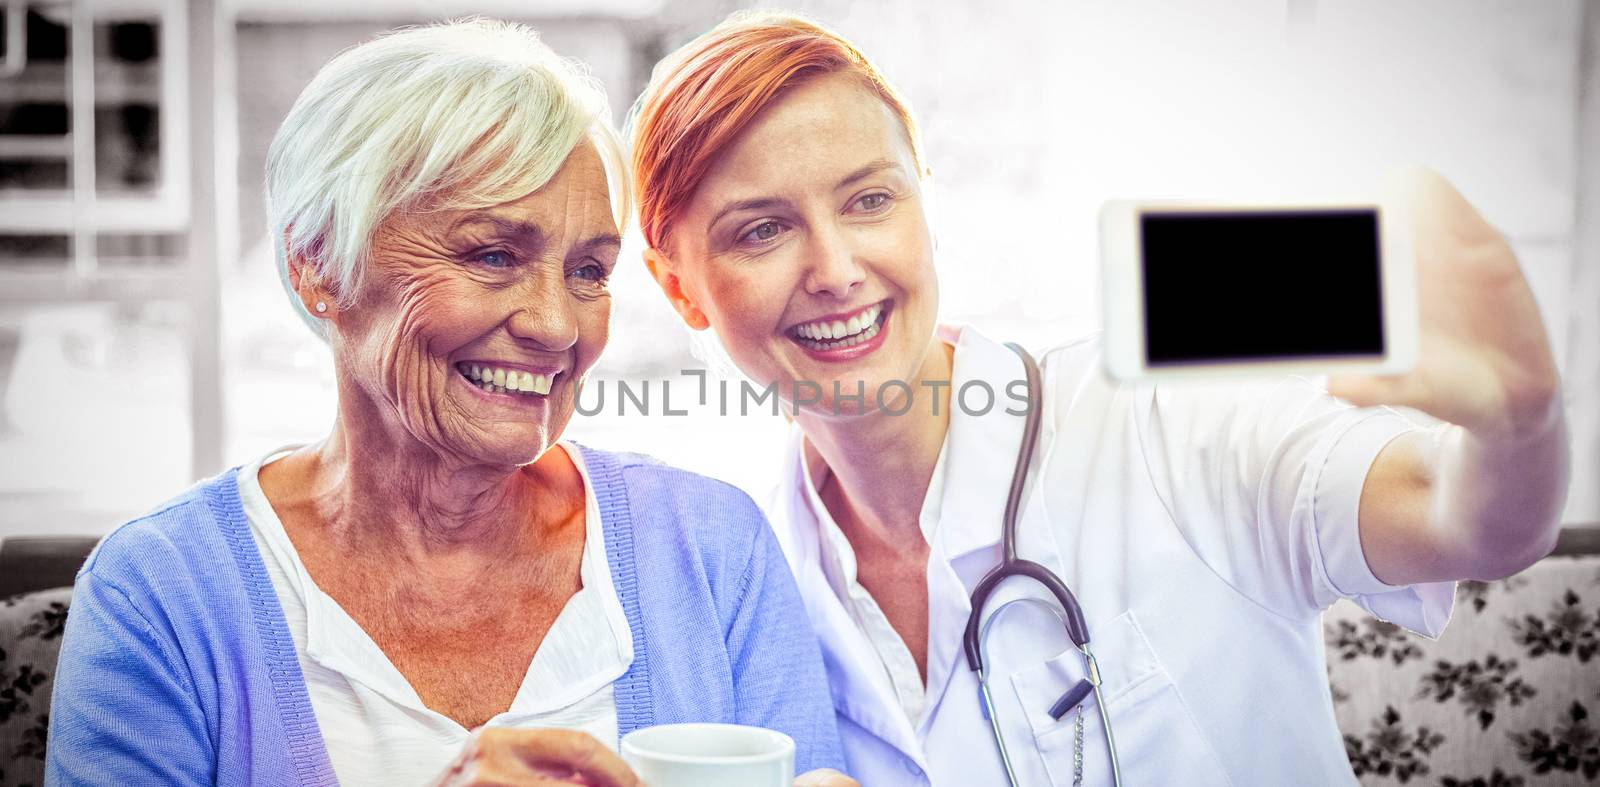 Smiling doctor and patient looking at phone while having tea at home